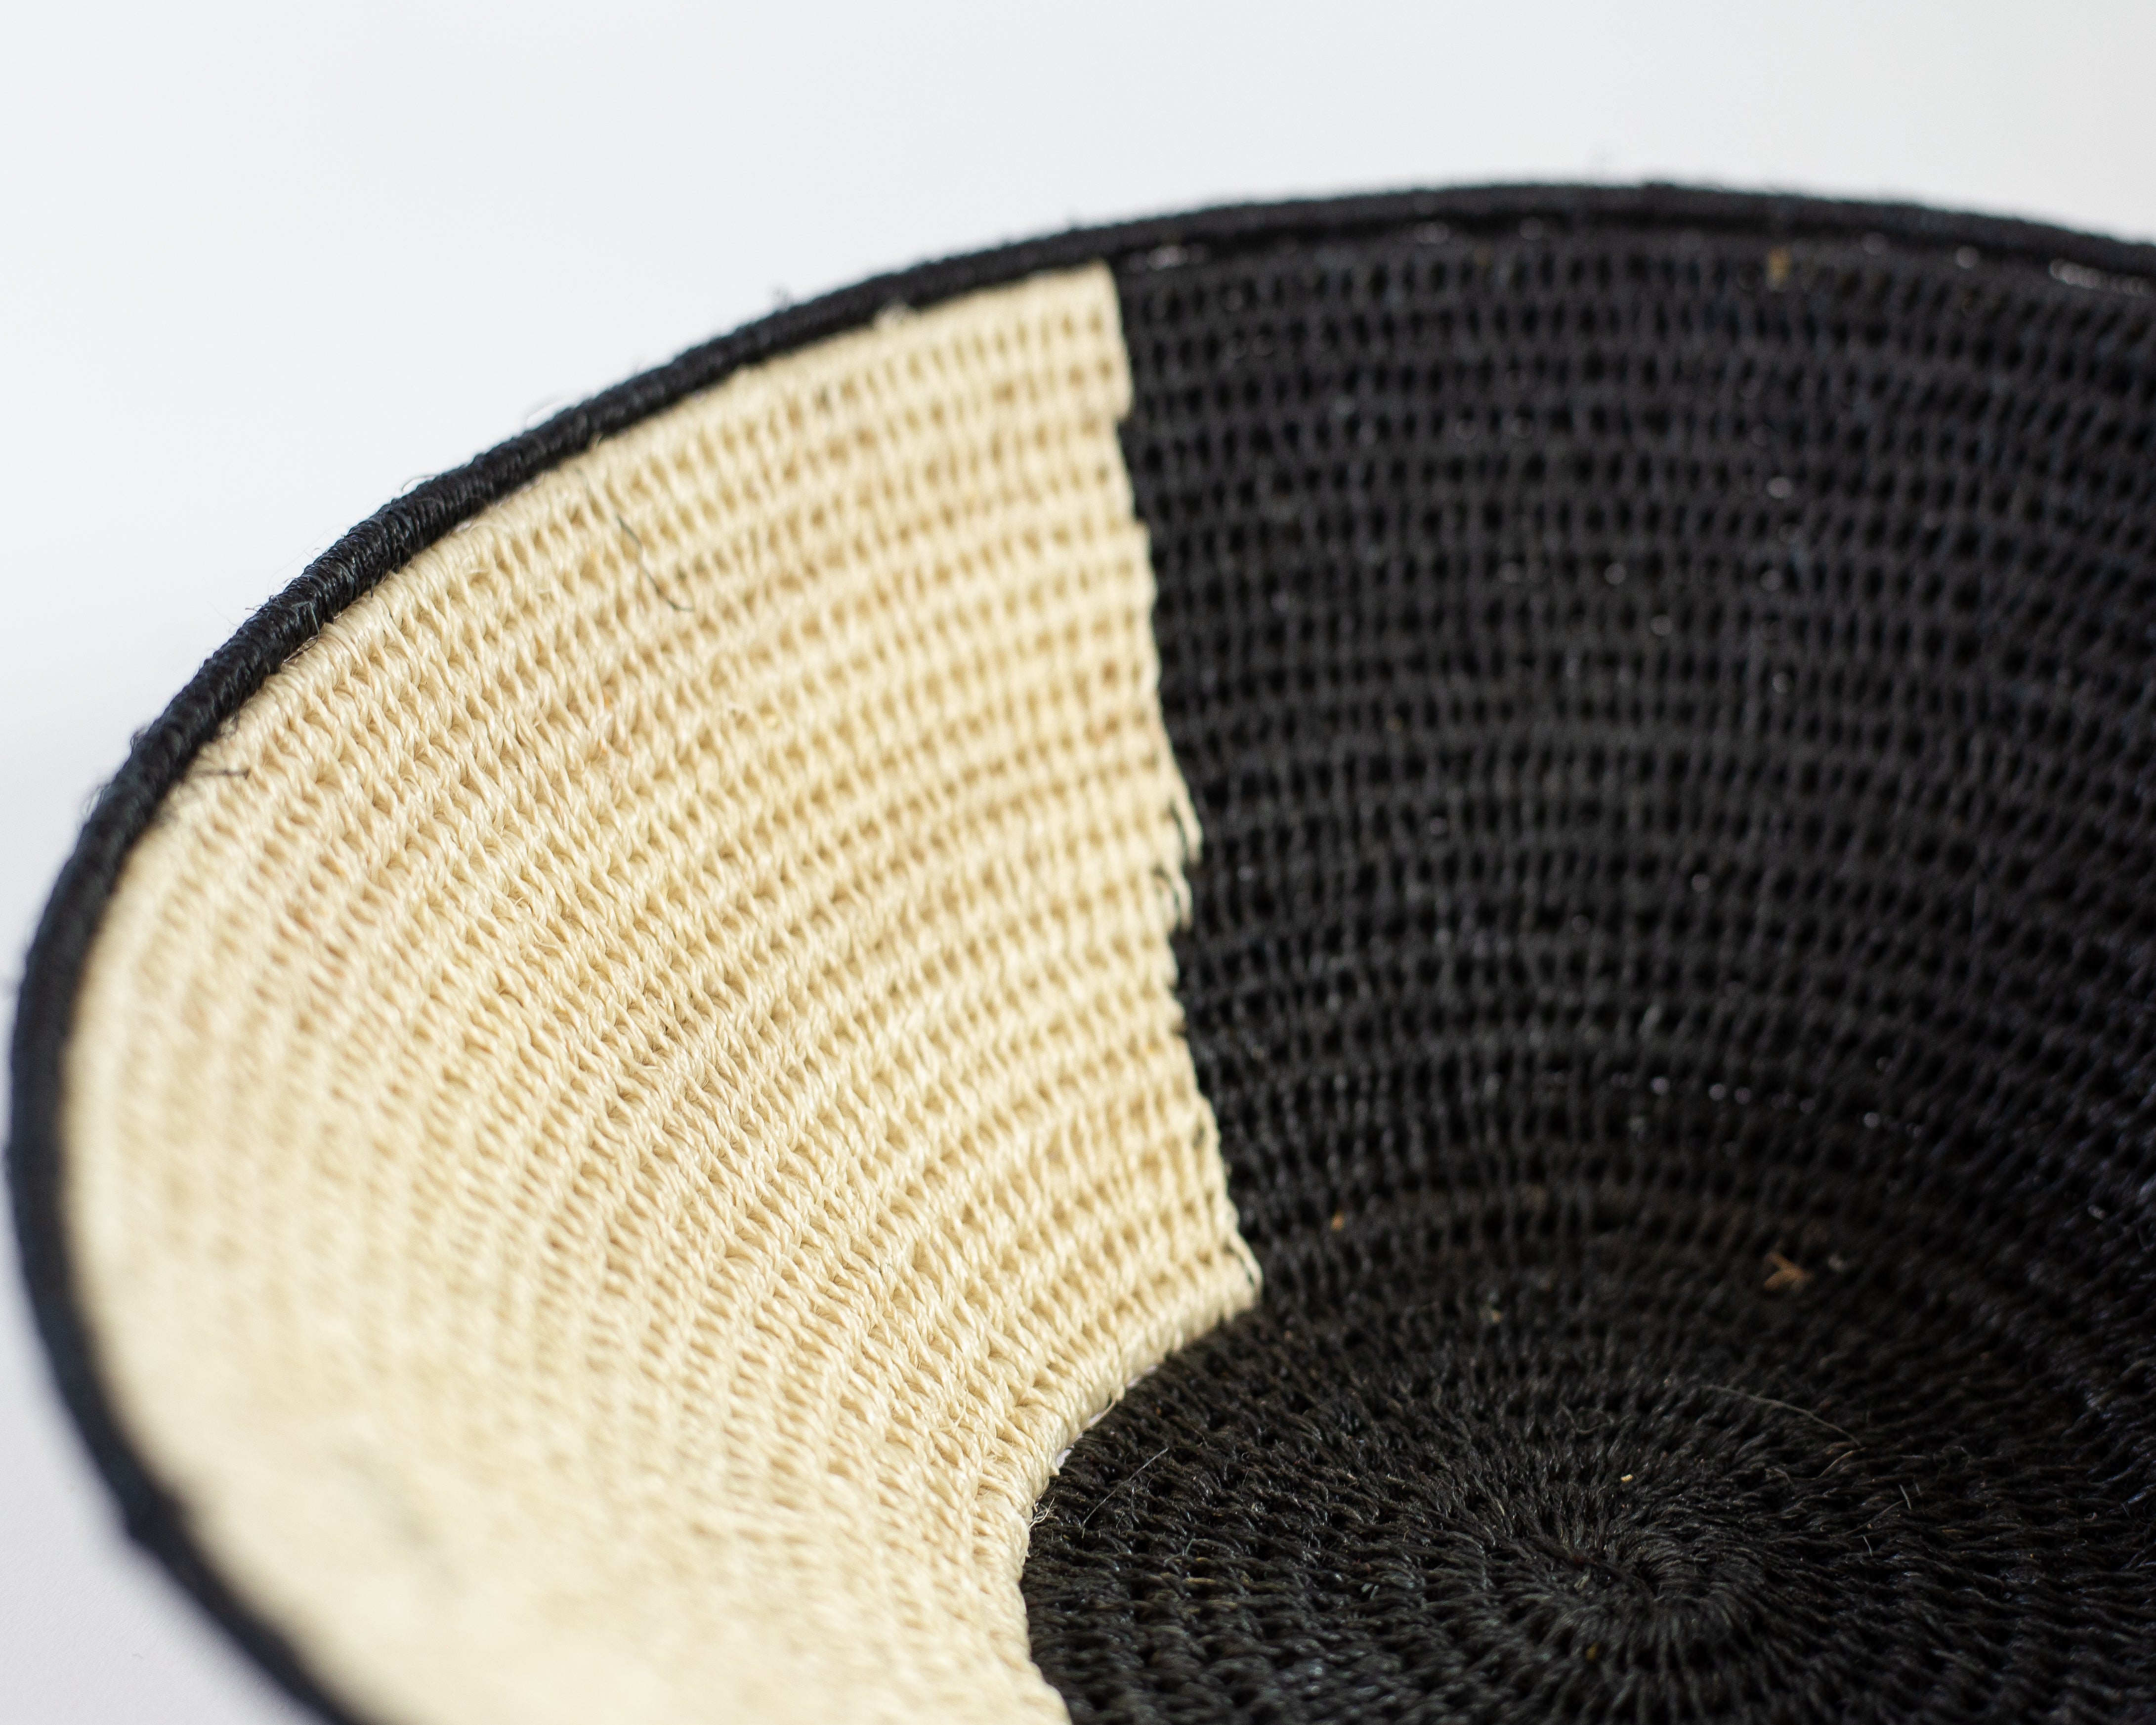 Black and White Sisal Basket by Ester